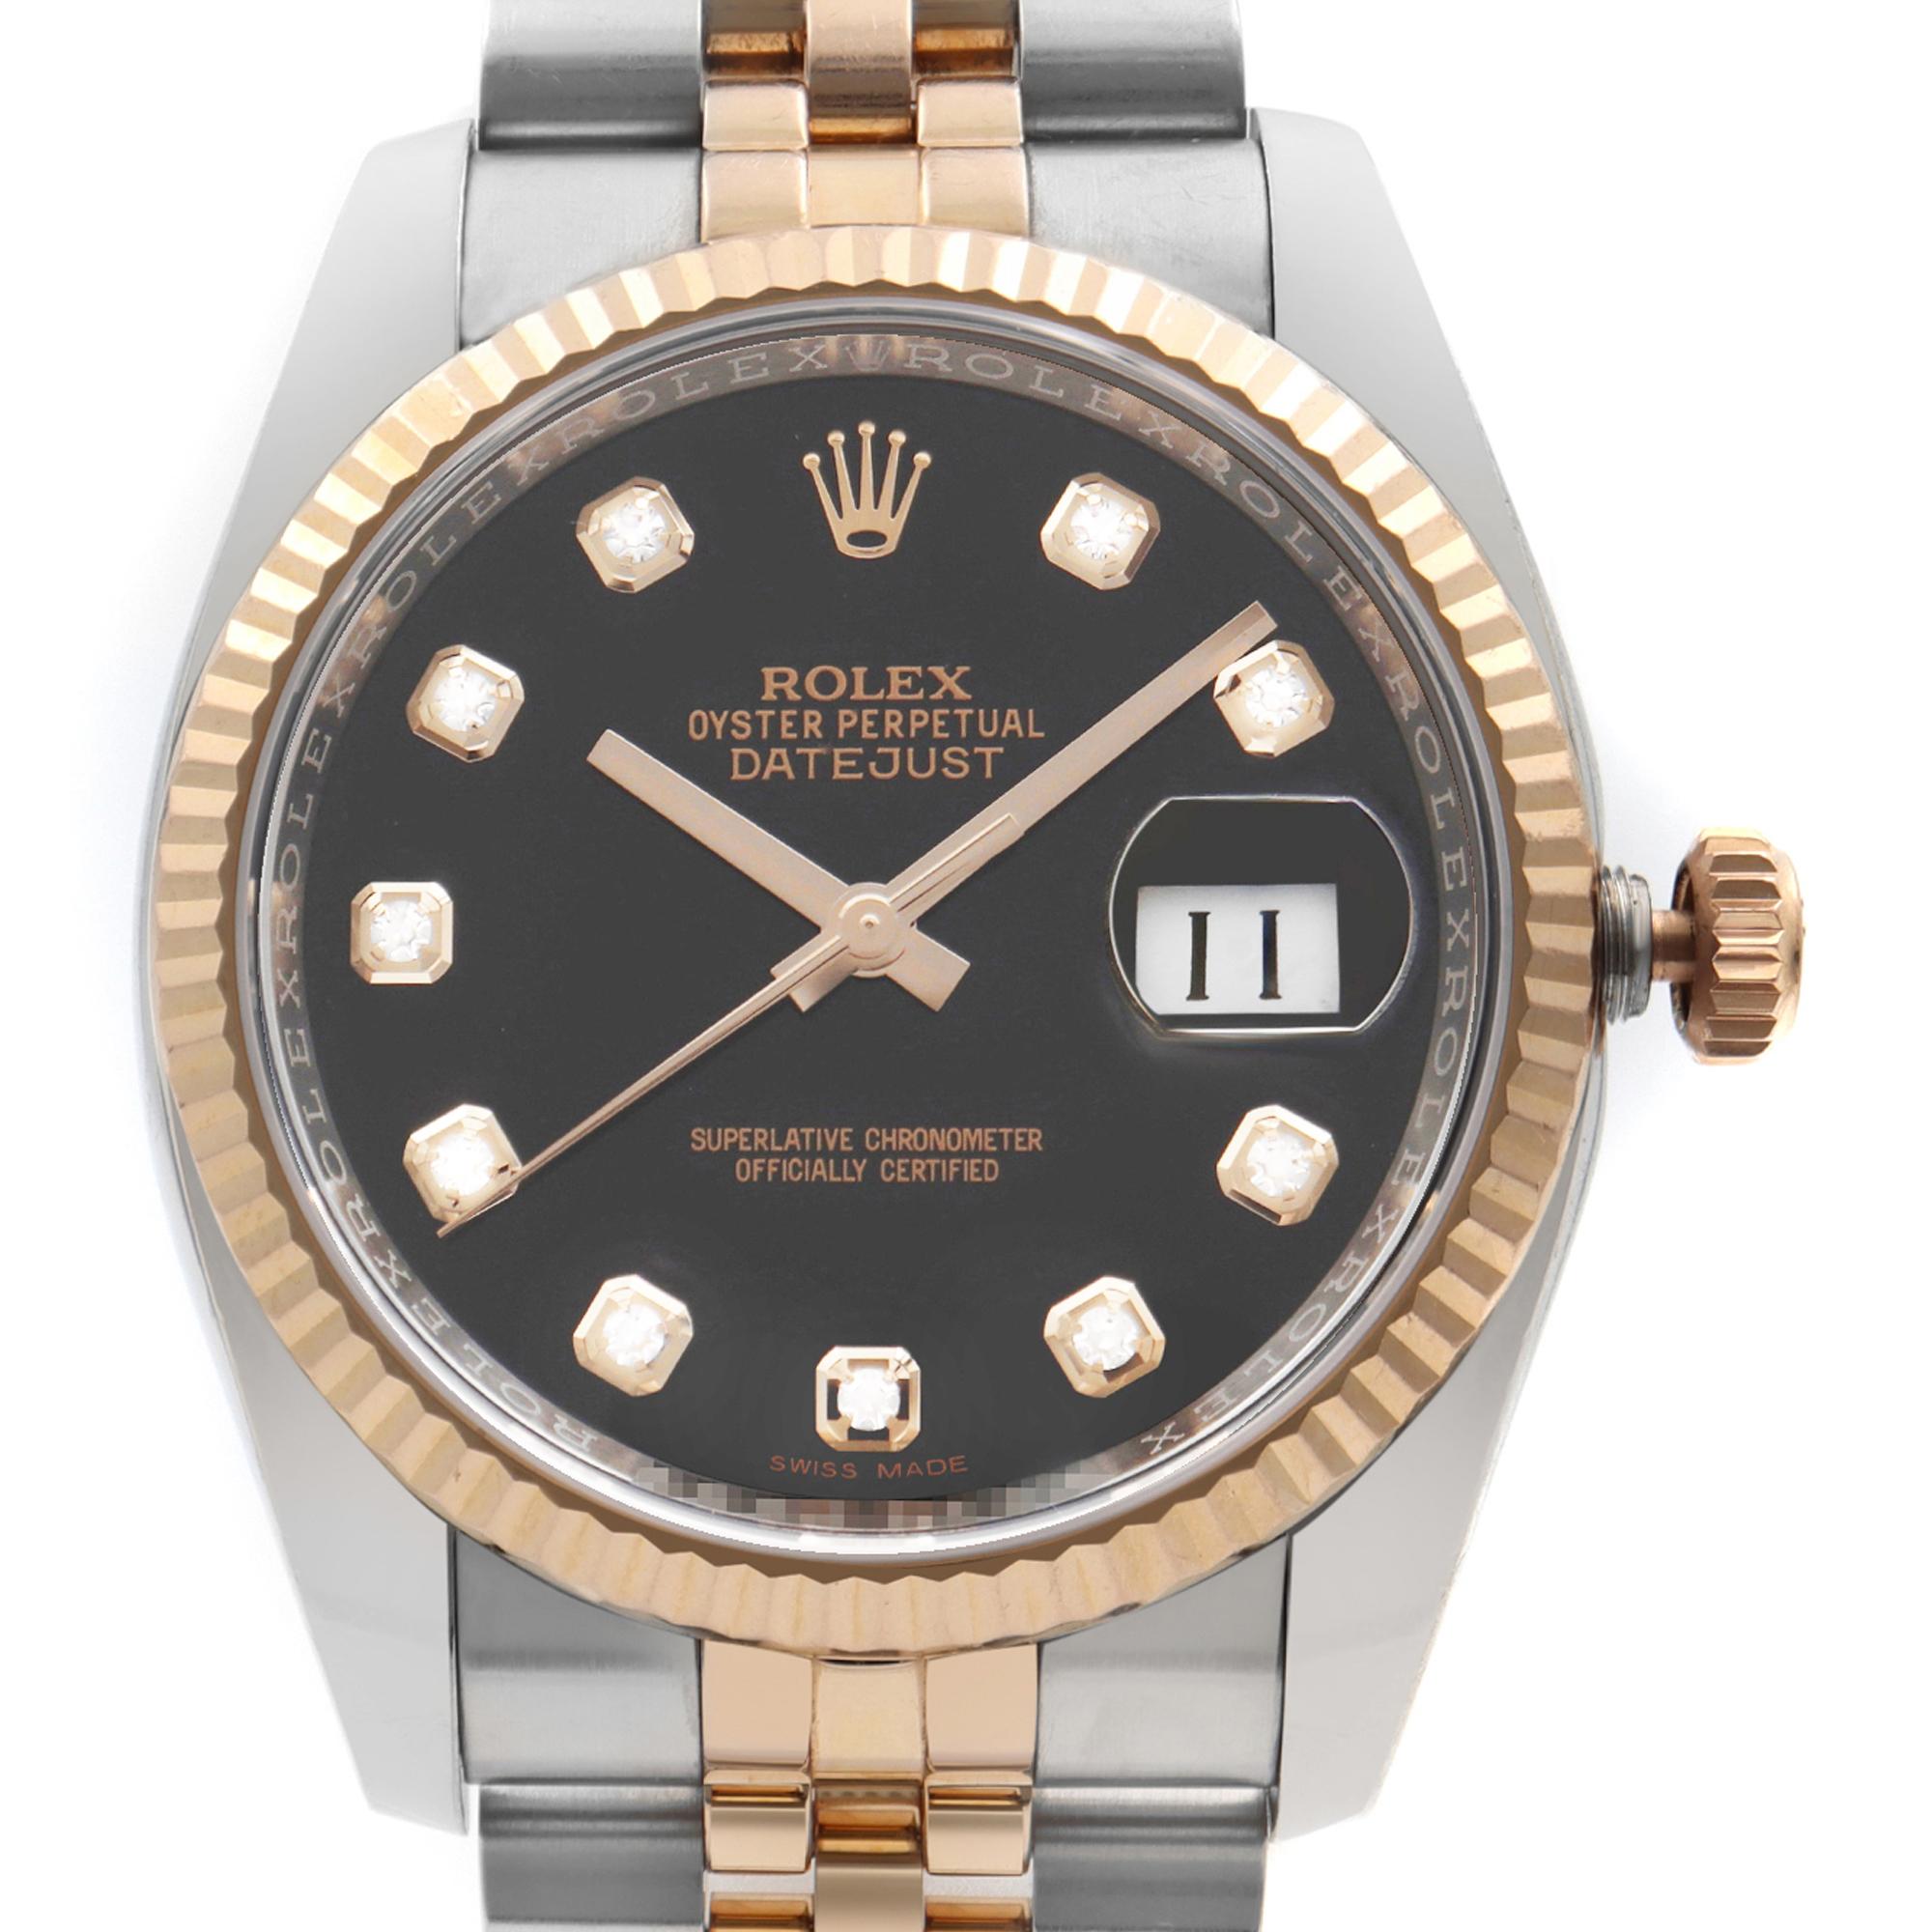 Factory Black Diamond dial. Pre-owned Rolex Oyster Perpetual Datejust Diamond Black Dial Men's Watch. This Beautiful Timepiece Features:  Steel with Polished Solid 18k Everose Gold Jubilee Bracelet. No Original Box and Papers are Included. Comes